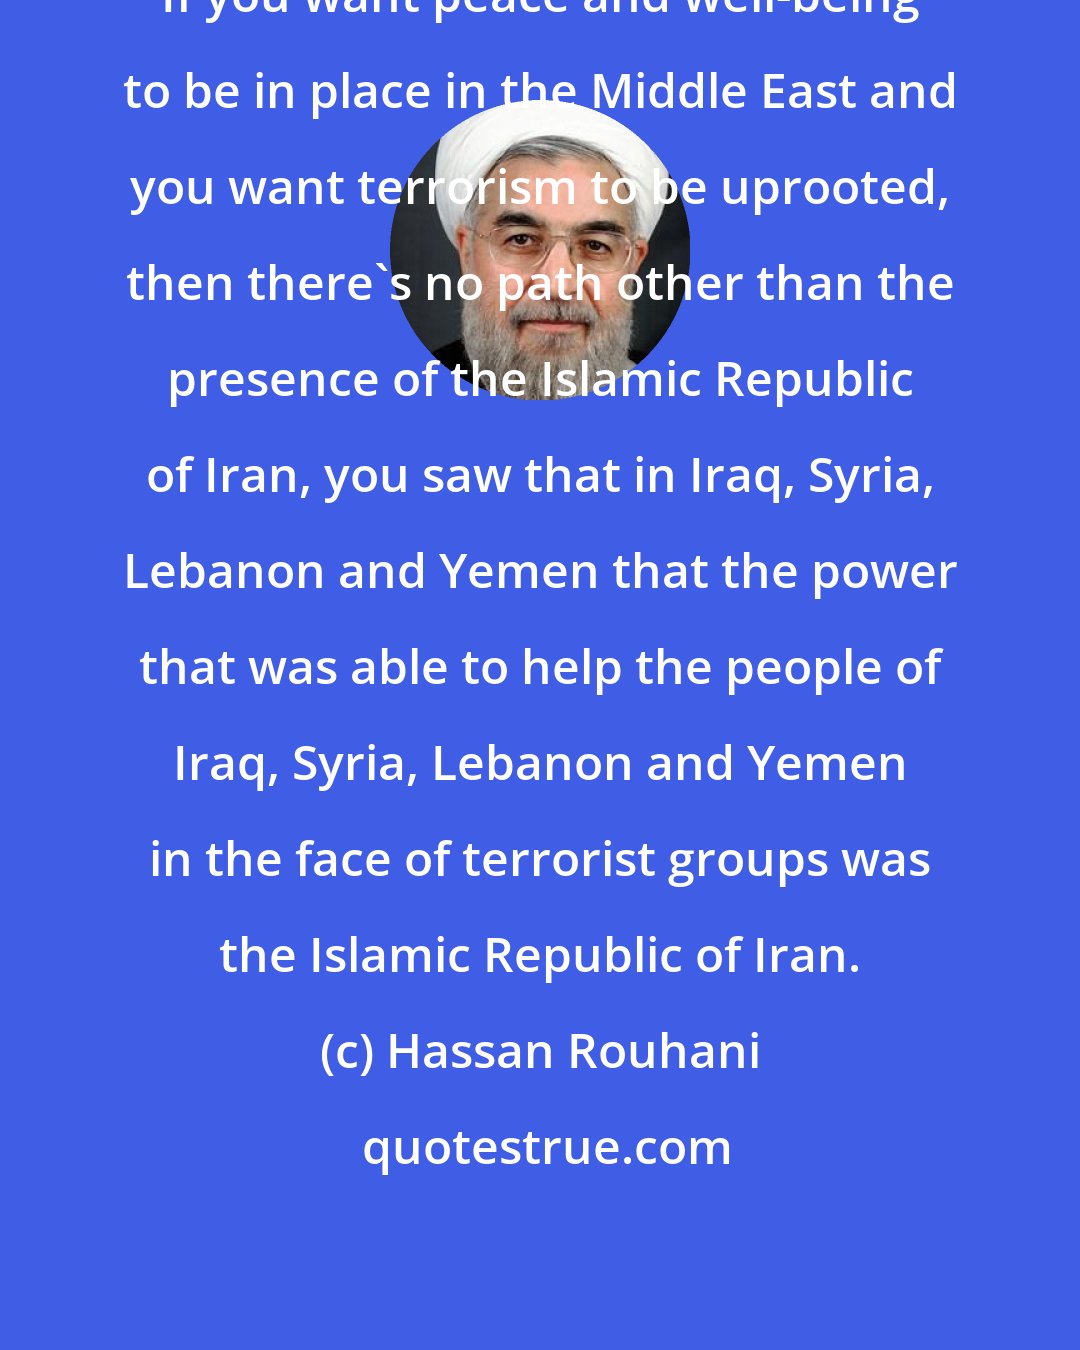 Hassan Rouhani: If you want peace and well-being to be in place in the Middle East and you want terrorism to be uprooted, then there's no path other than the presence of the Islamic Republic of Iran, you saw that in Iraq, Syria, Lebanon and Yemen that the power that was able to help the people of Iraq, Syria, Lebanon and Yemen in the face of terrorist groups was the Islamic Republic of Iran.